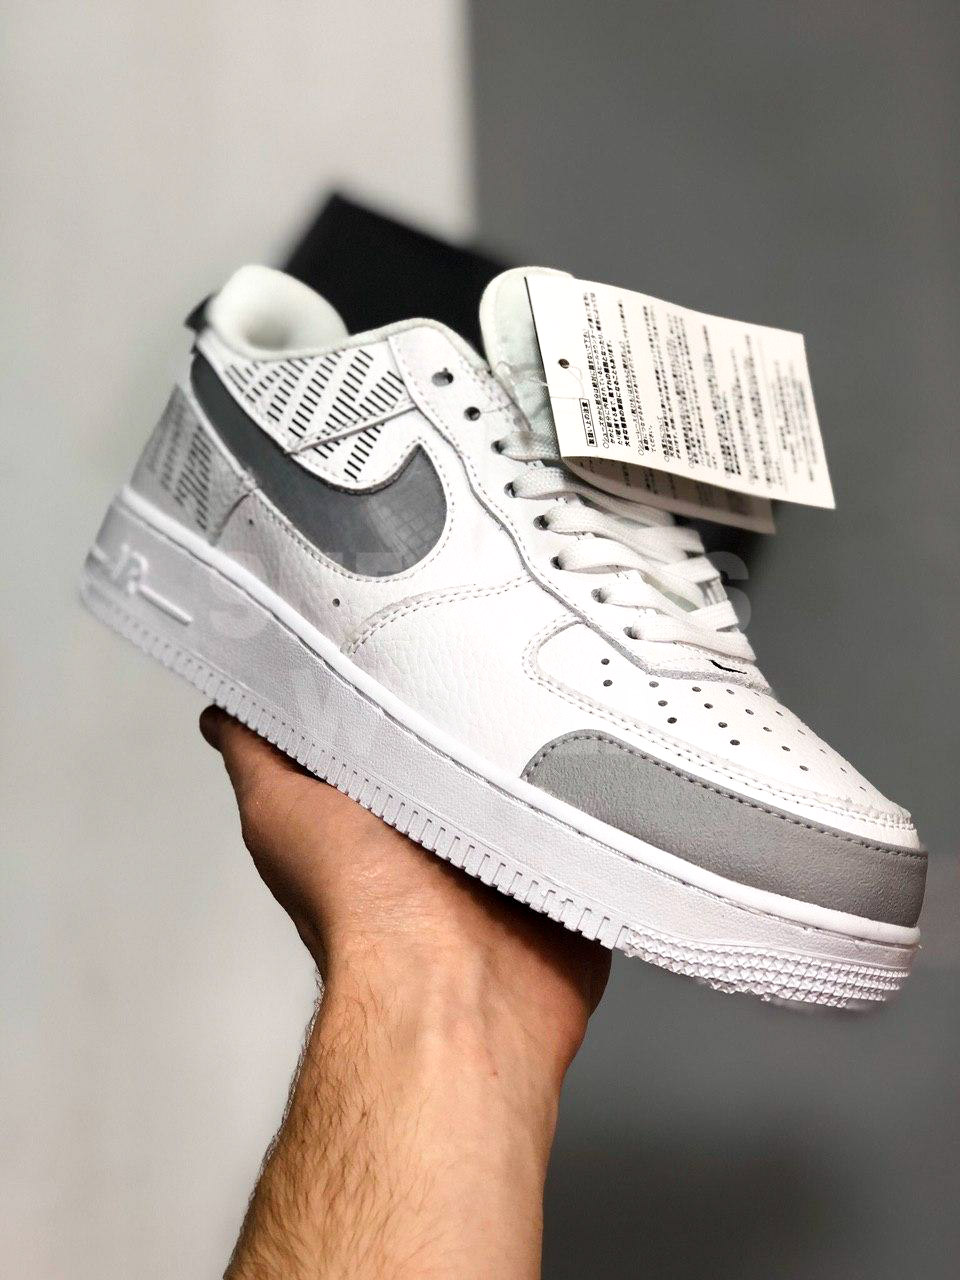 under construction air forces in white